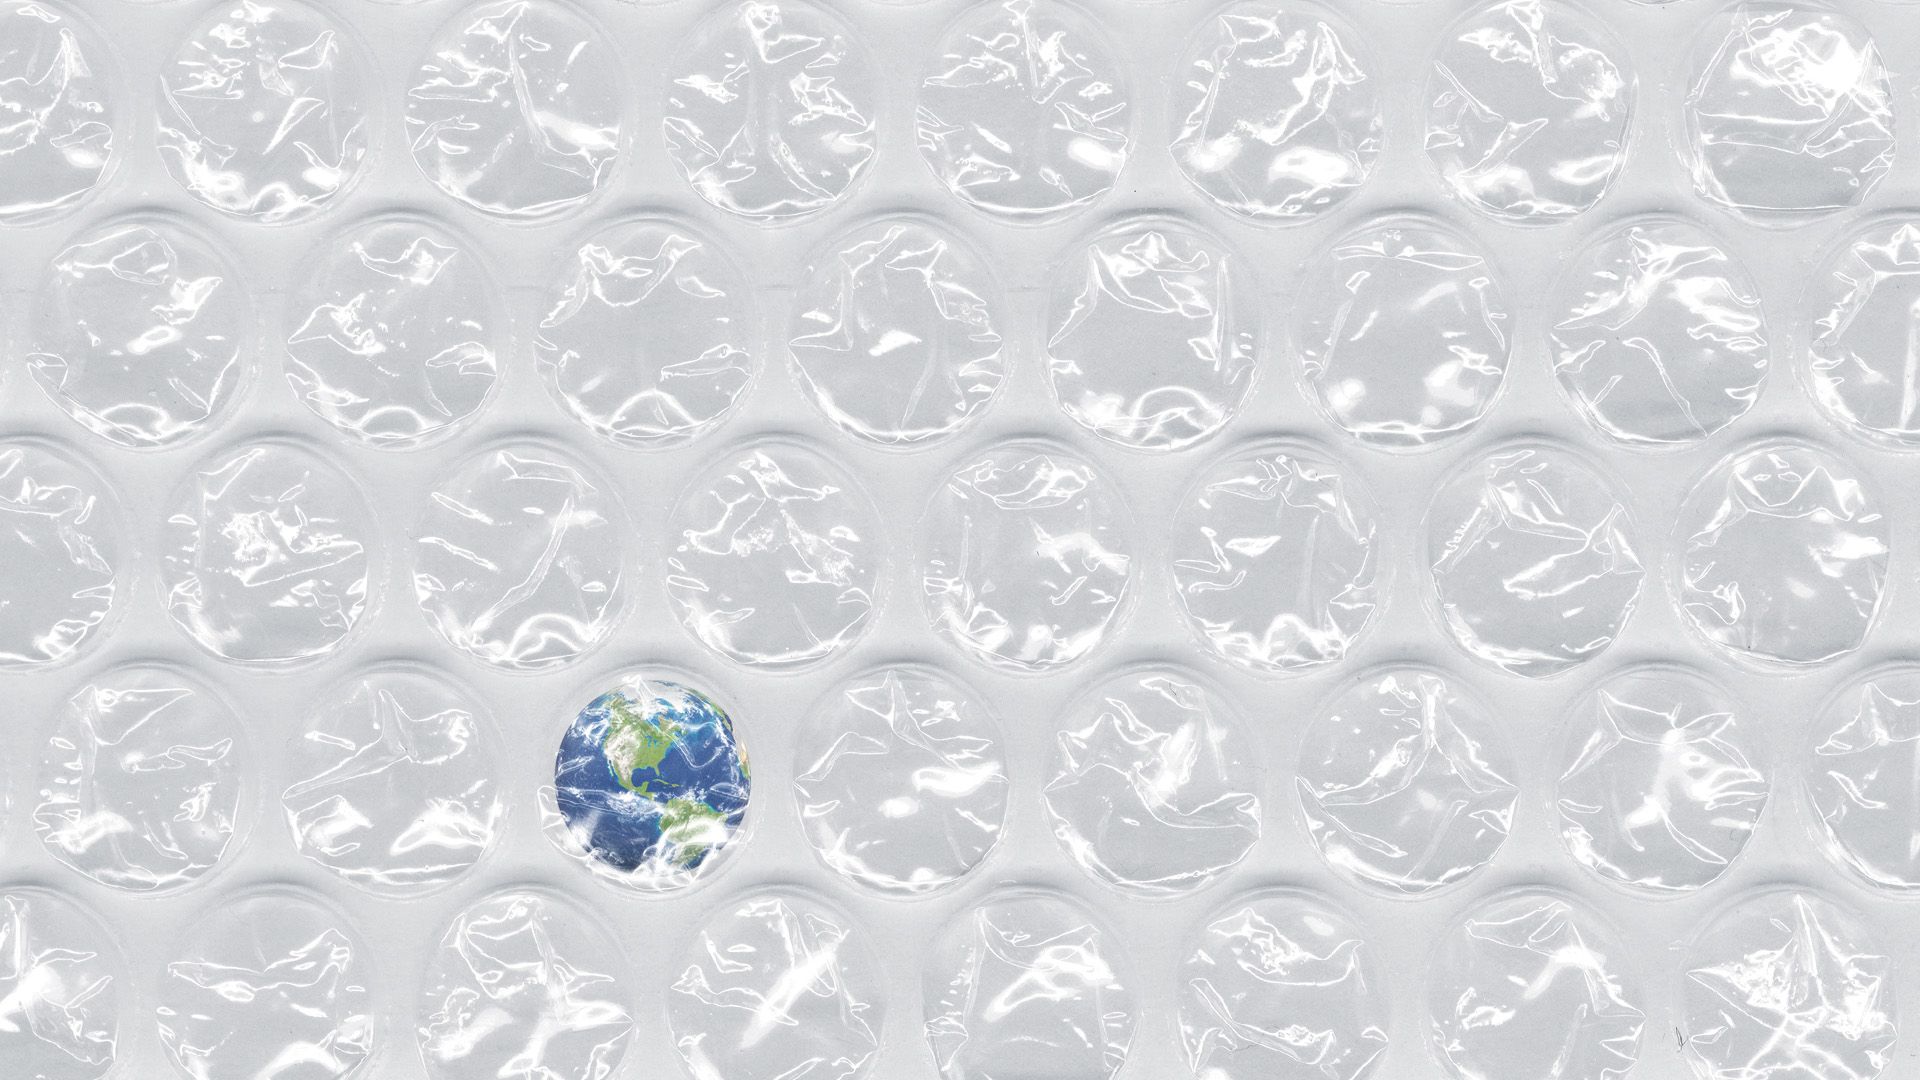 Illustration of plastic bubble wrap with one bubble including the Earth.